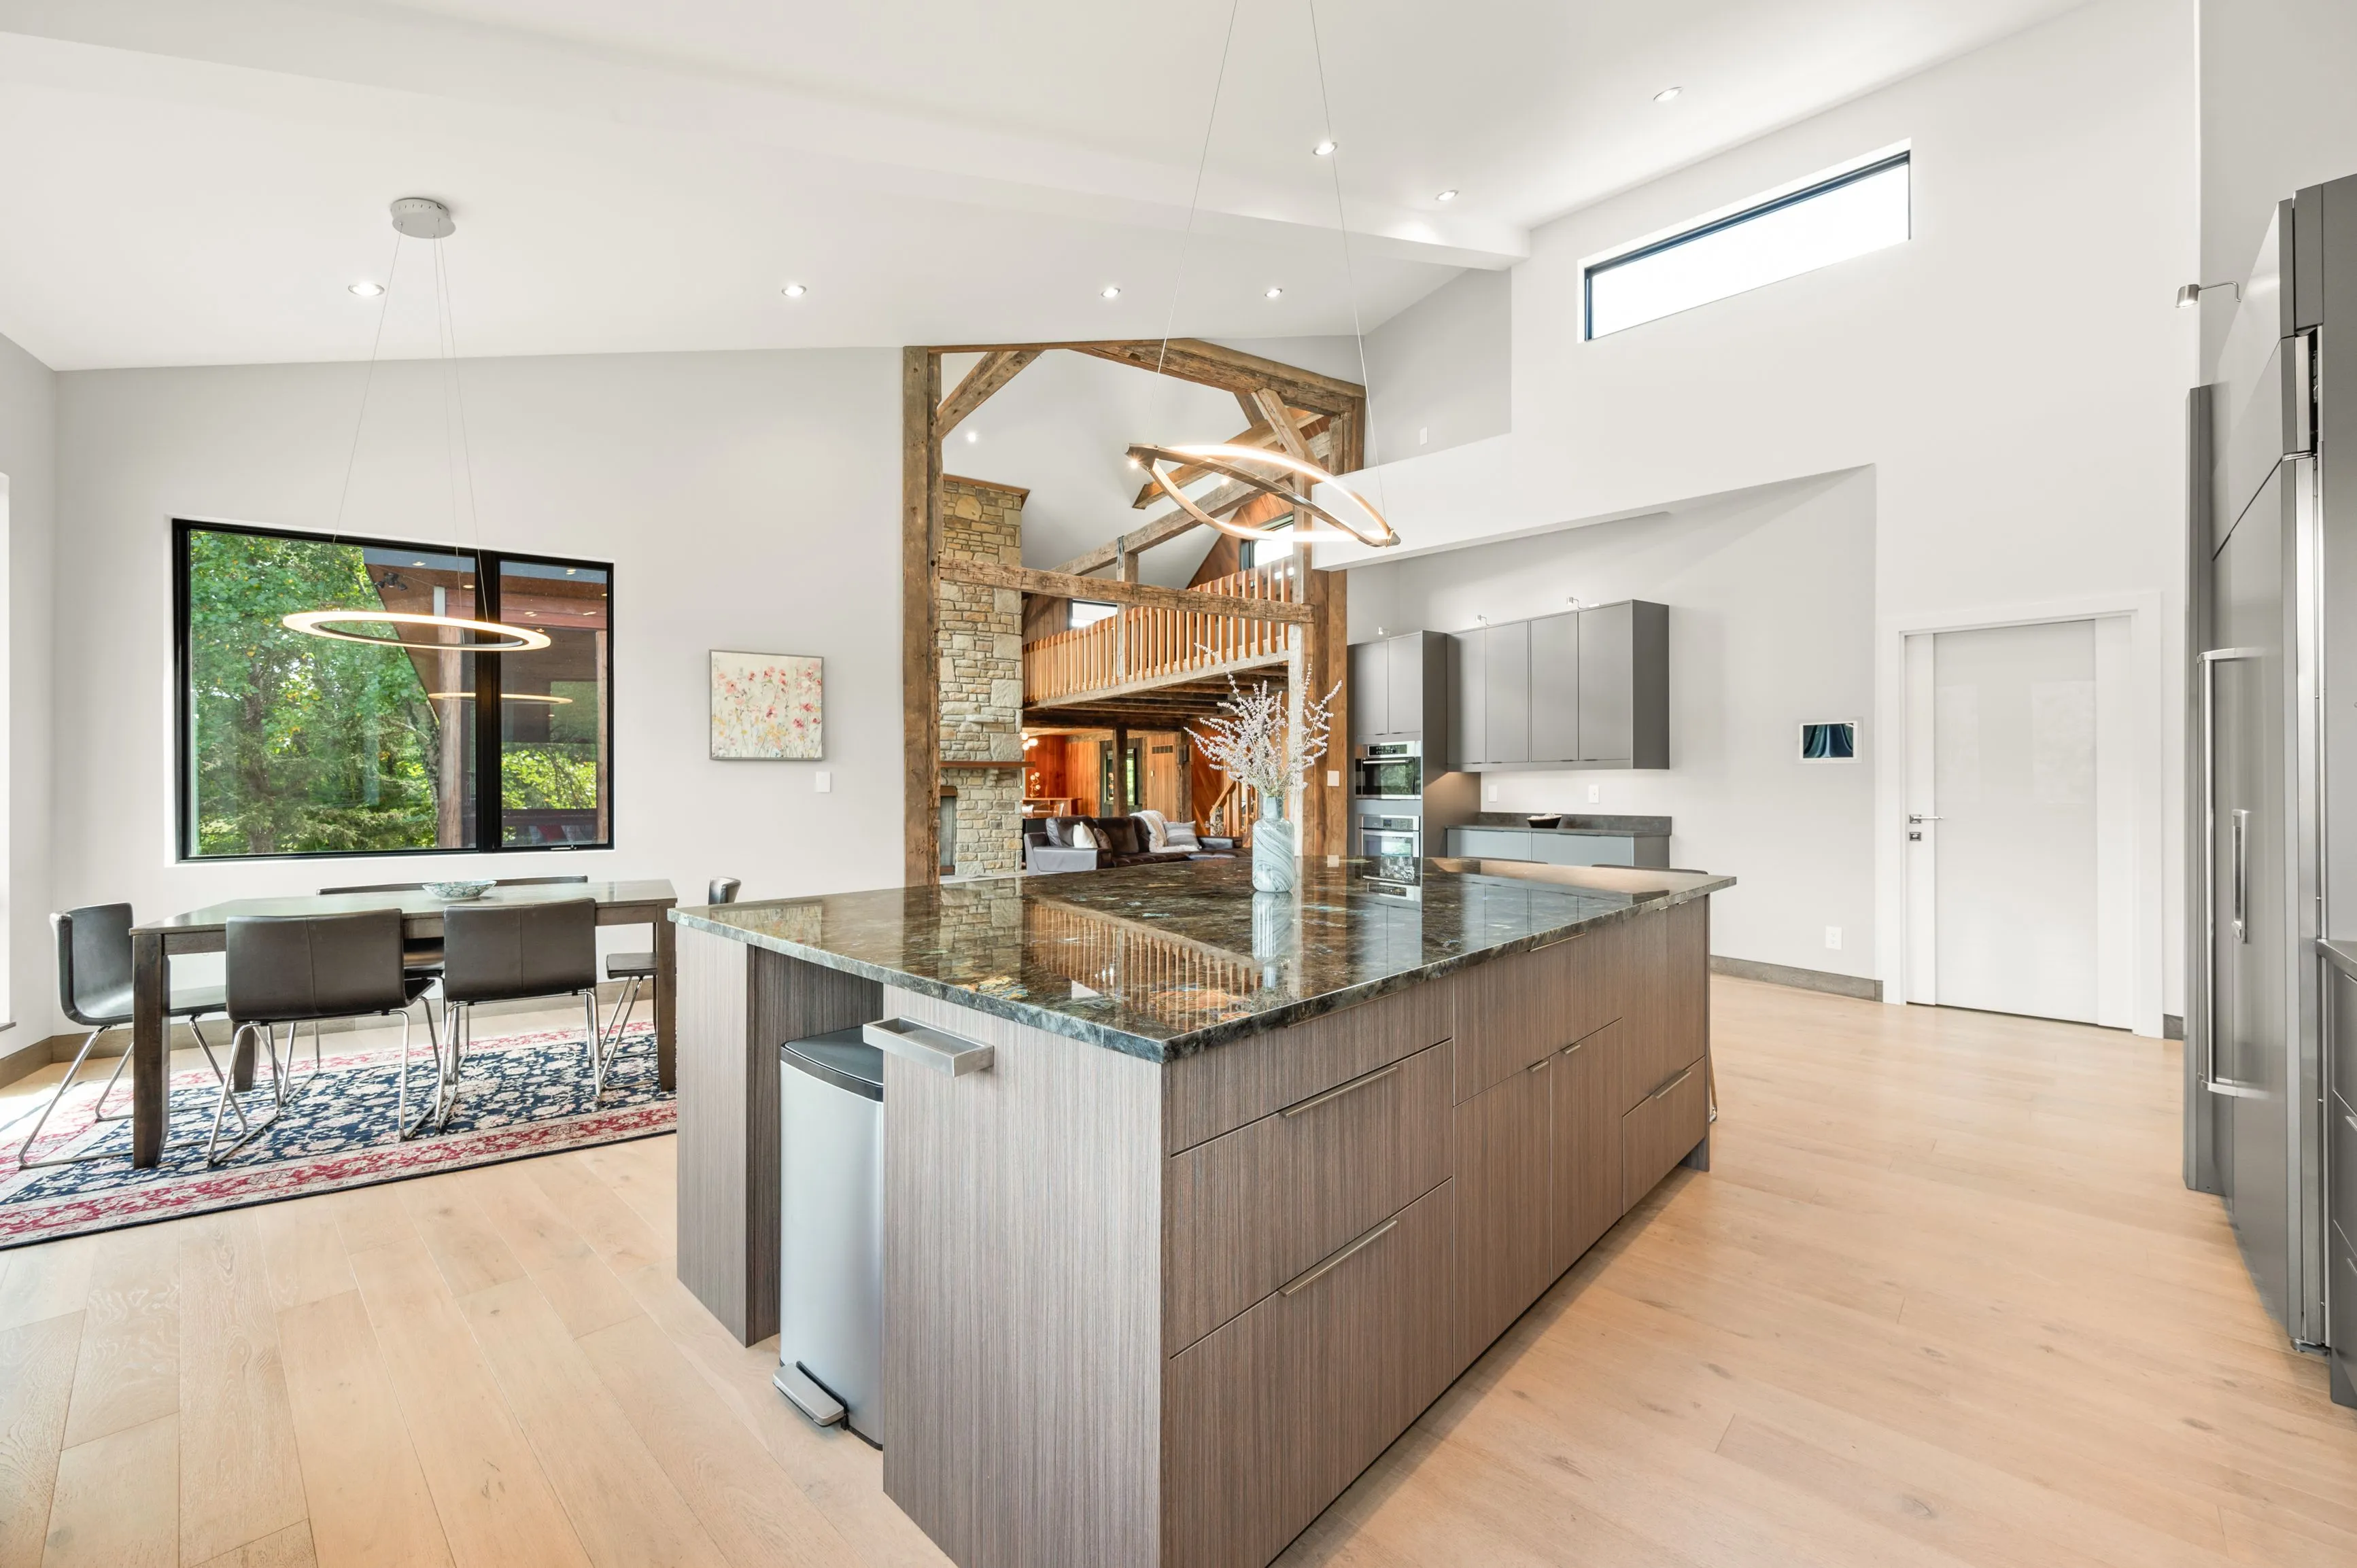 Modern kitchen interior with granite countertop island, stainless steel appliances, and an open-concept dining area with a large window overlooking greenery.